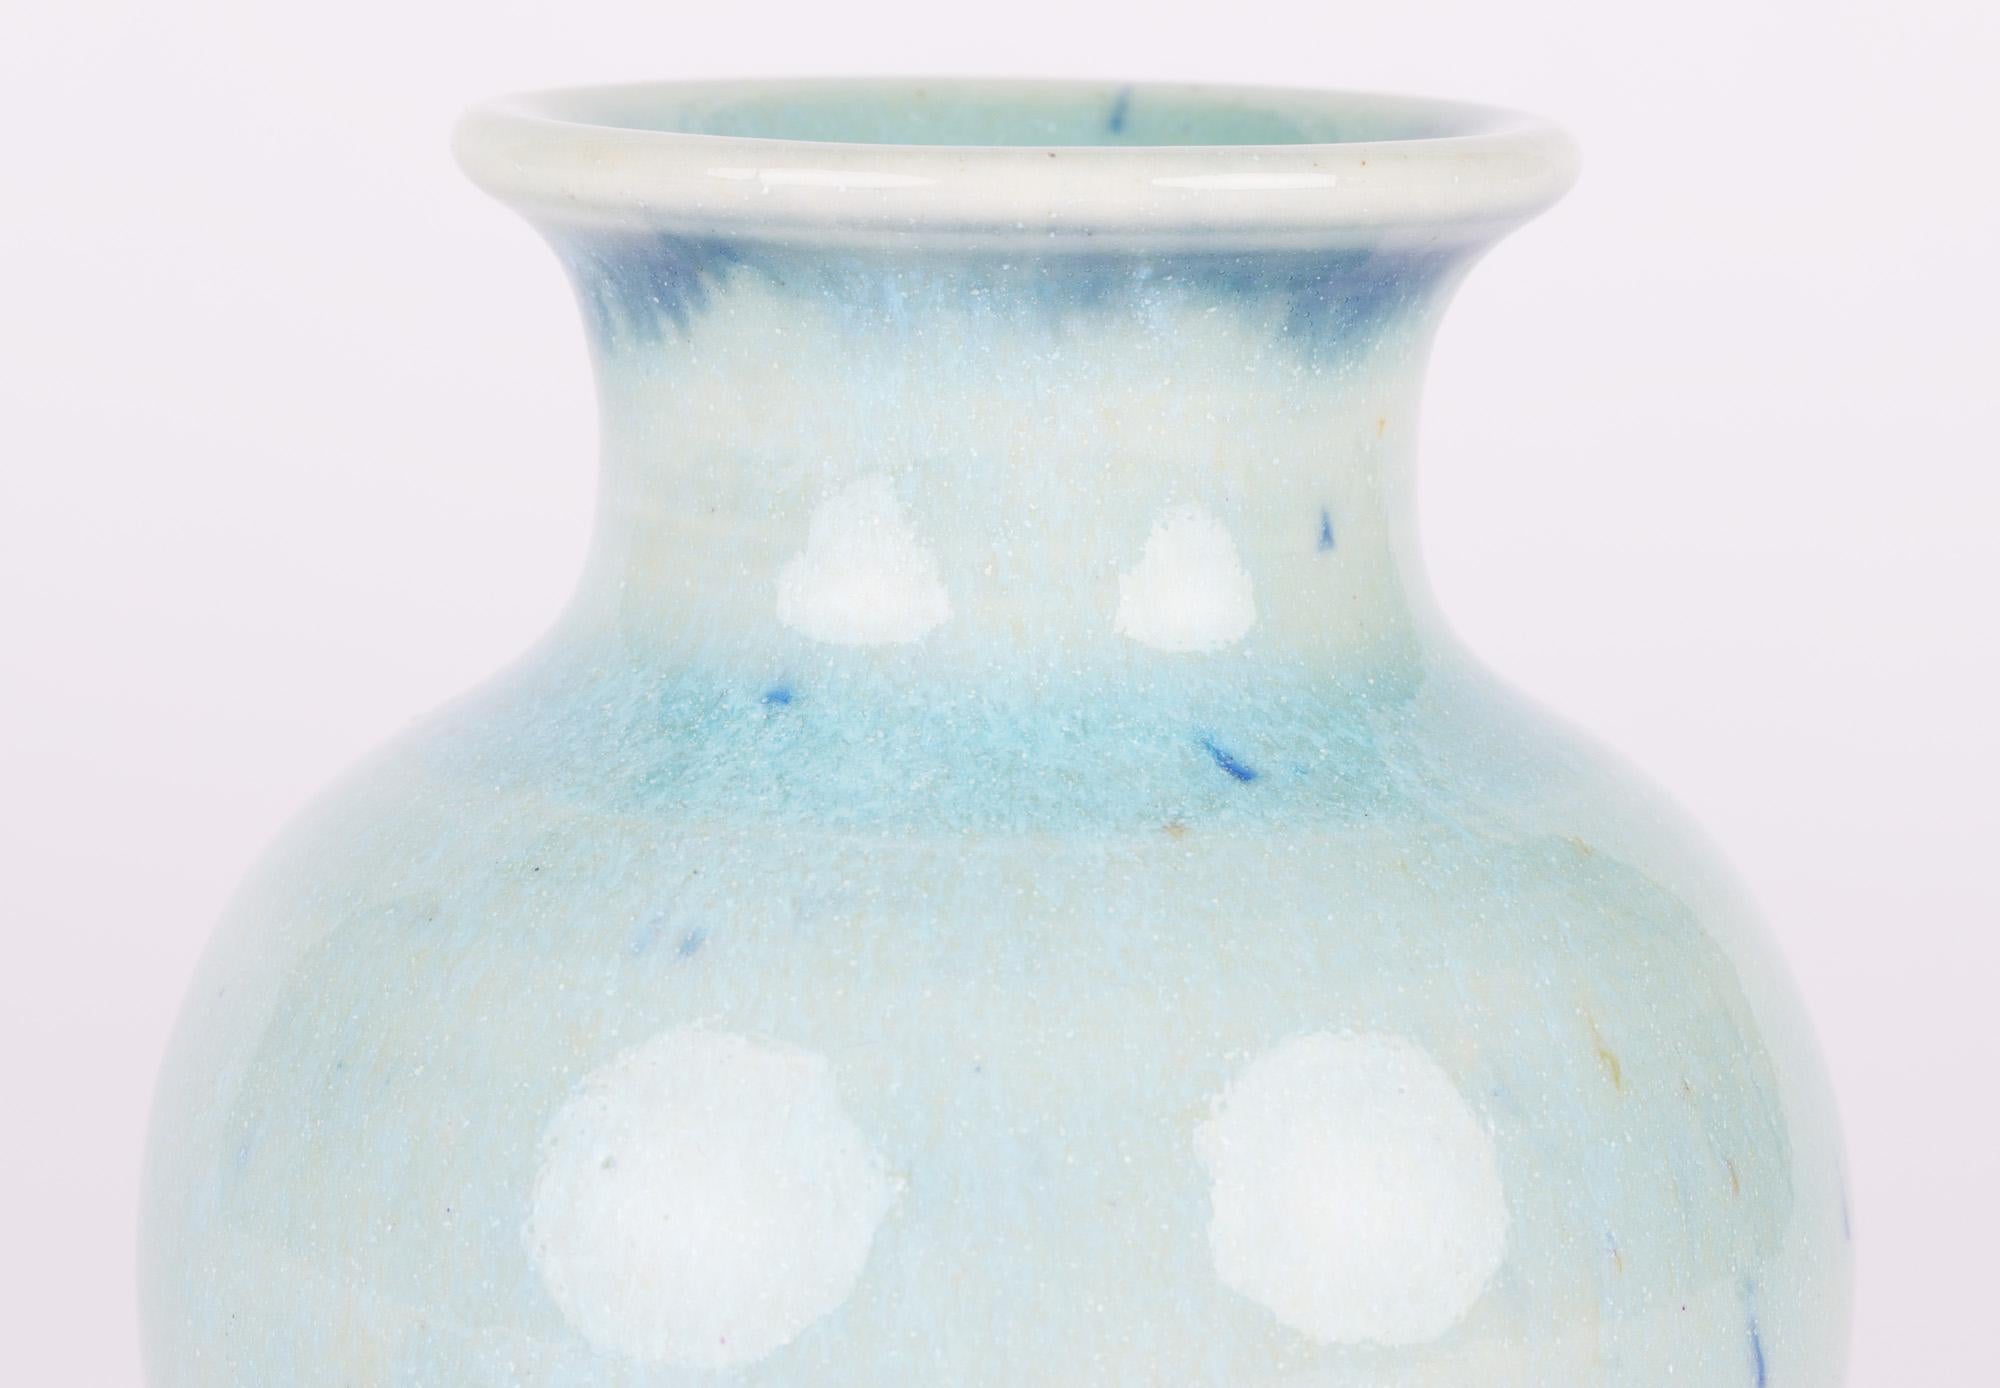 A stunning Canadian studio pottery vase decorated in light blue glazes with an associated pottery stand by Lane Gordon Thorlaksson (Canadian, 1937-2009) dated 1972. 

Lane Gordon Thorlaksson was born in 1937 in Winnipeg, Manitoba and moved to